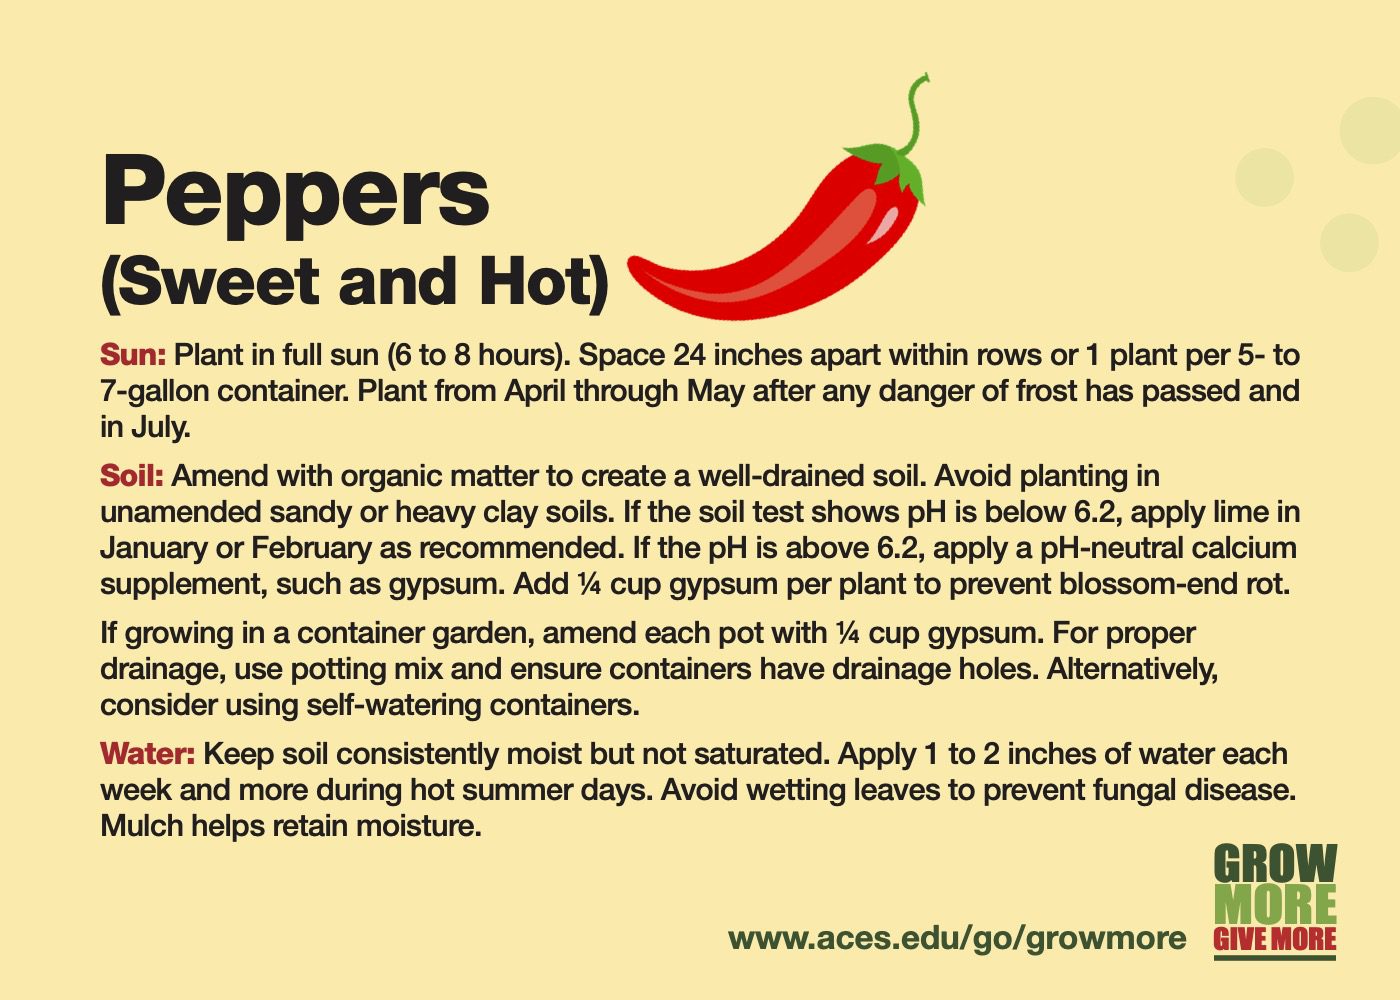 Peppers (Sweet and Hot) Card